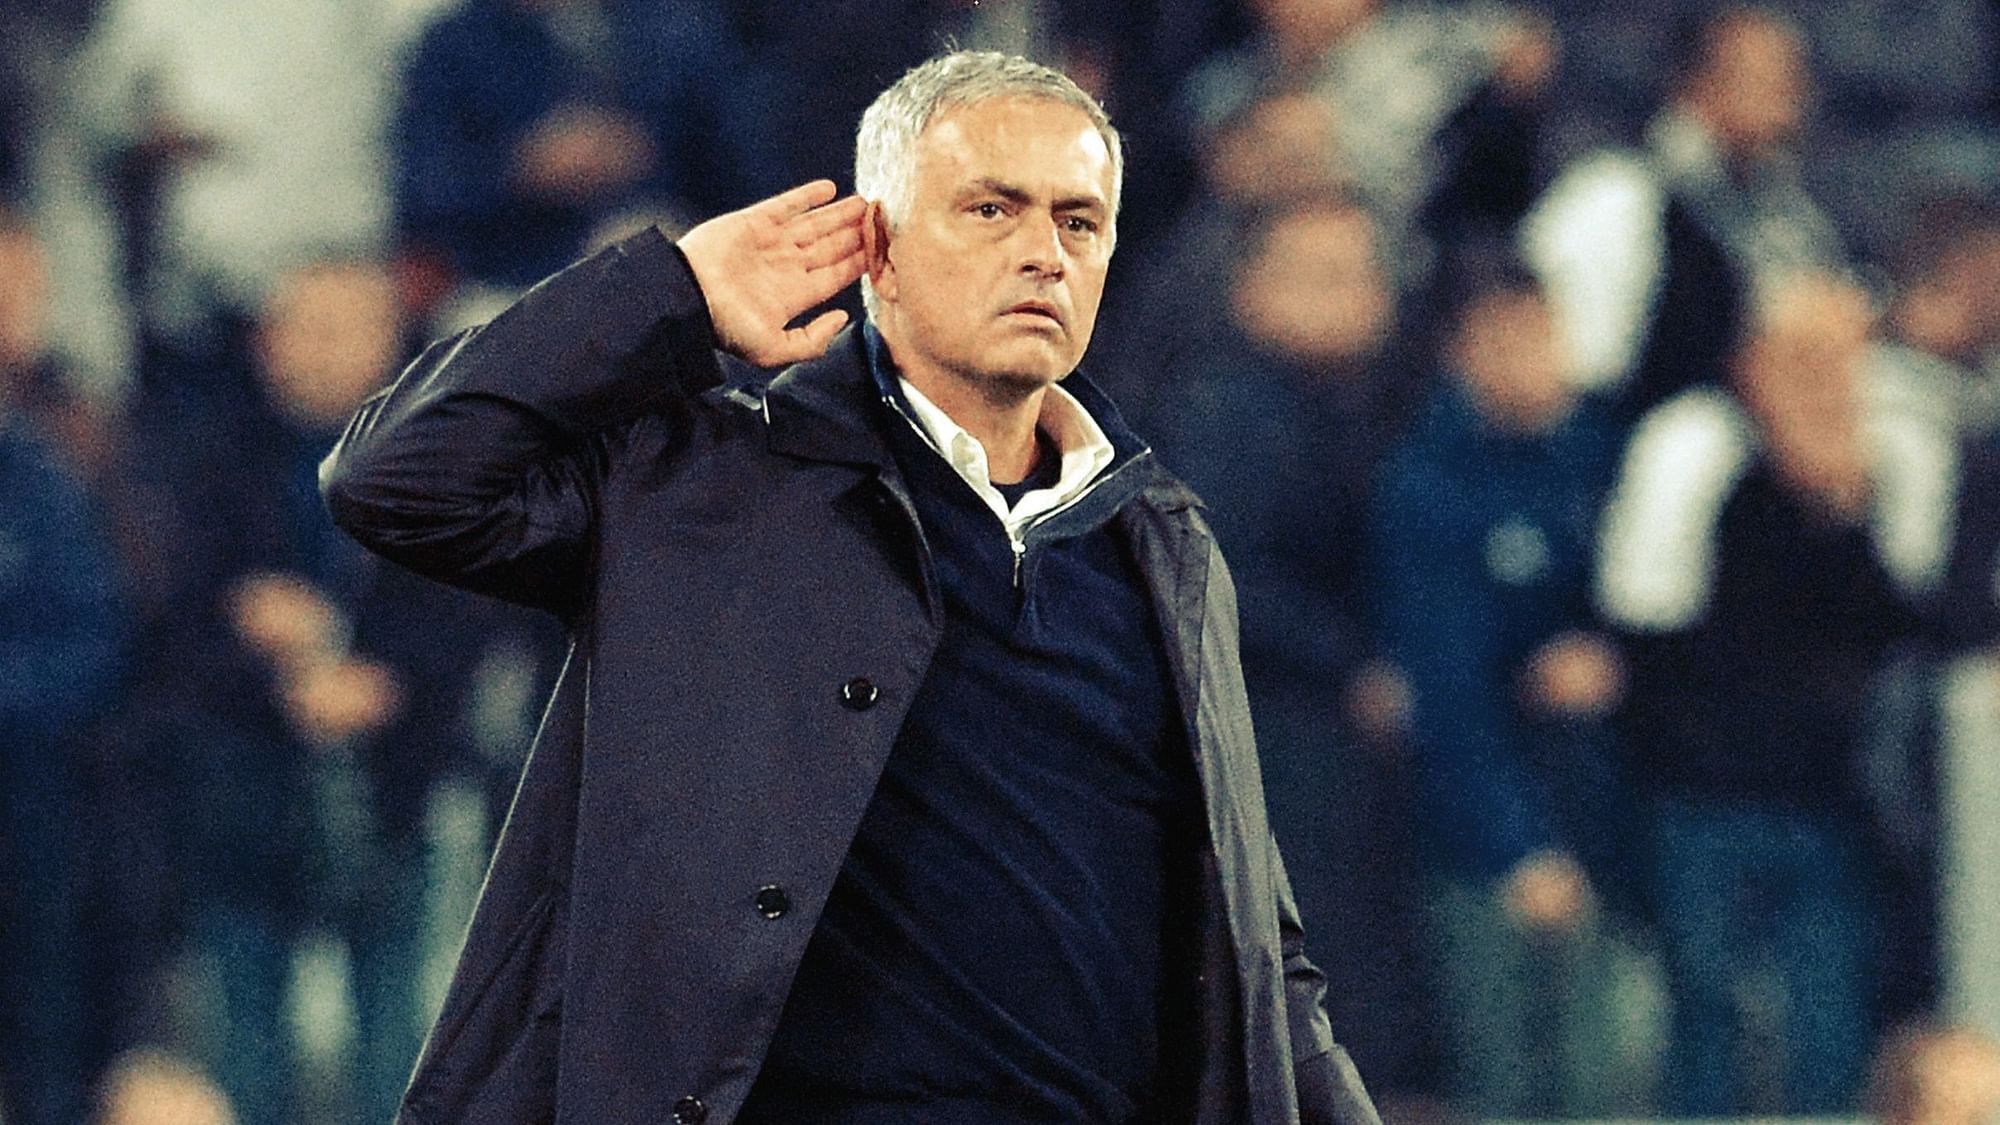 Jose Mourinho reacts after Manchester United’s victory over Juventus at Turin